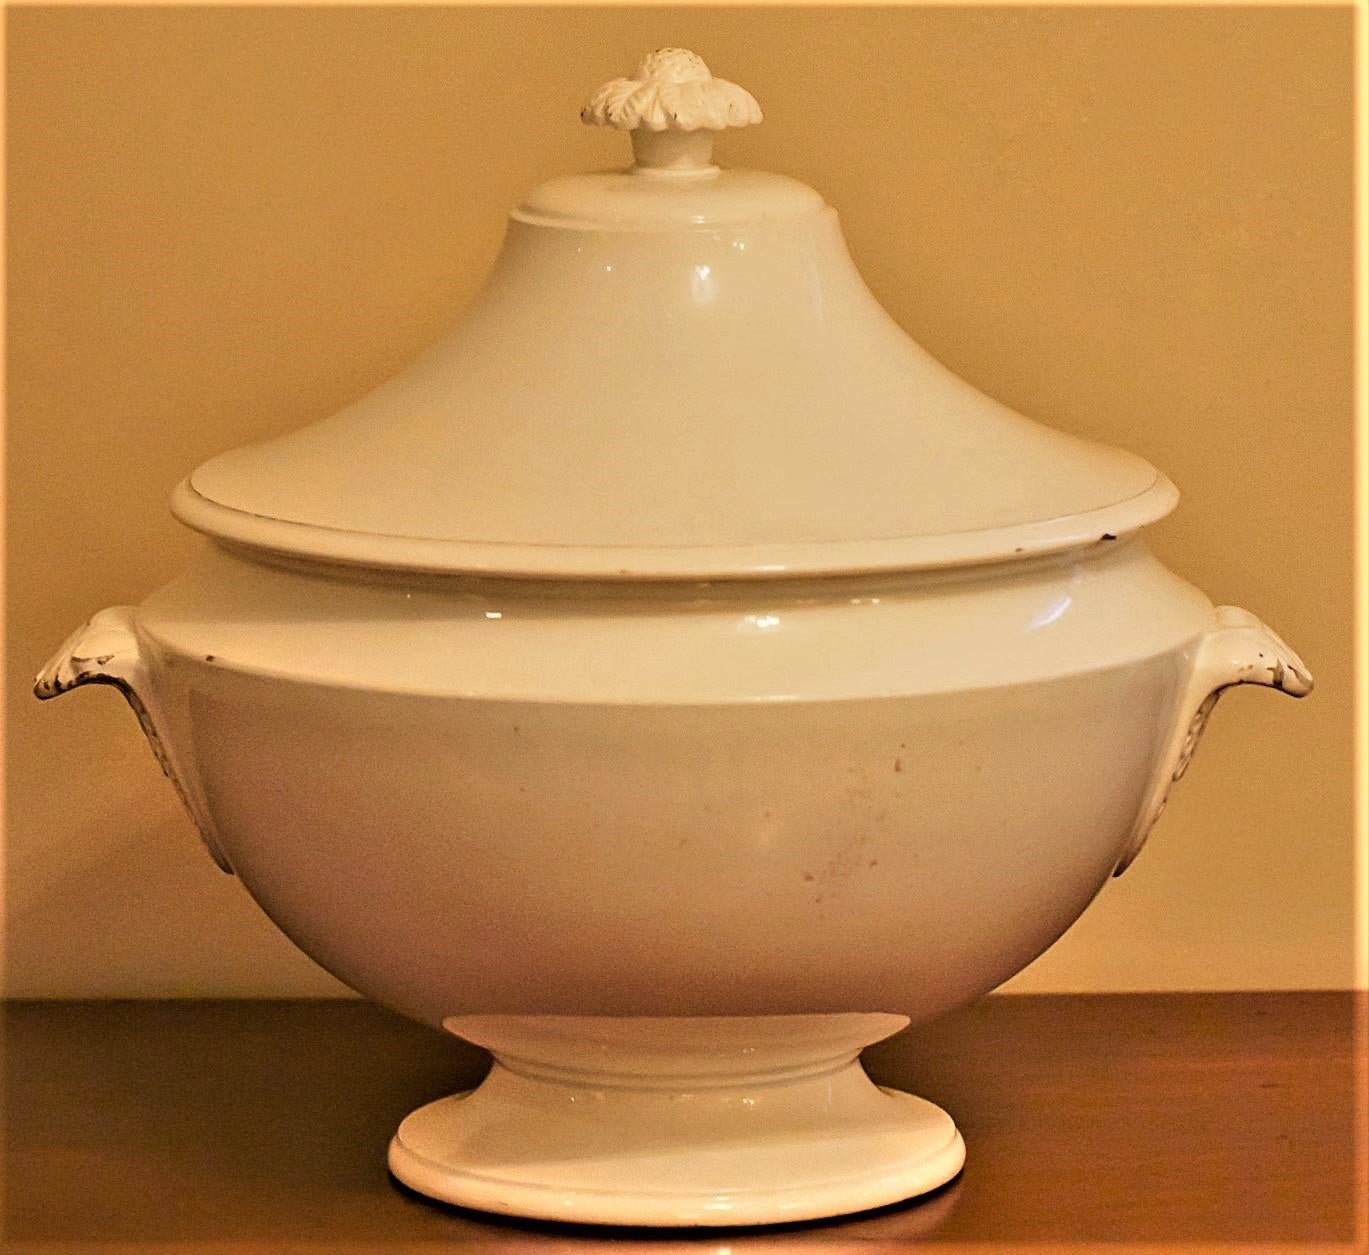 This round off-white soft-paste porcelain soup tureen was made by Paihart & Hautin in their suburban Paris factory.  The design is inspired by the Classical movement of the day. The handles and finial have impressed designs. There is an impressed